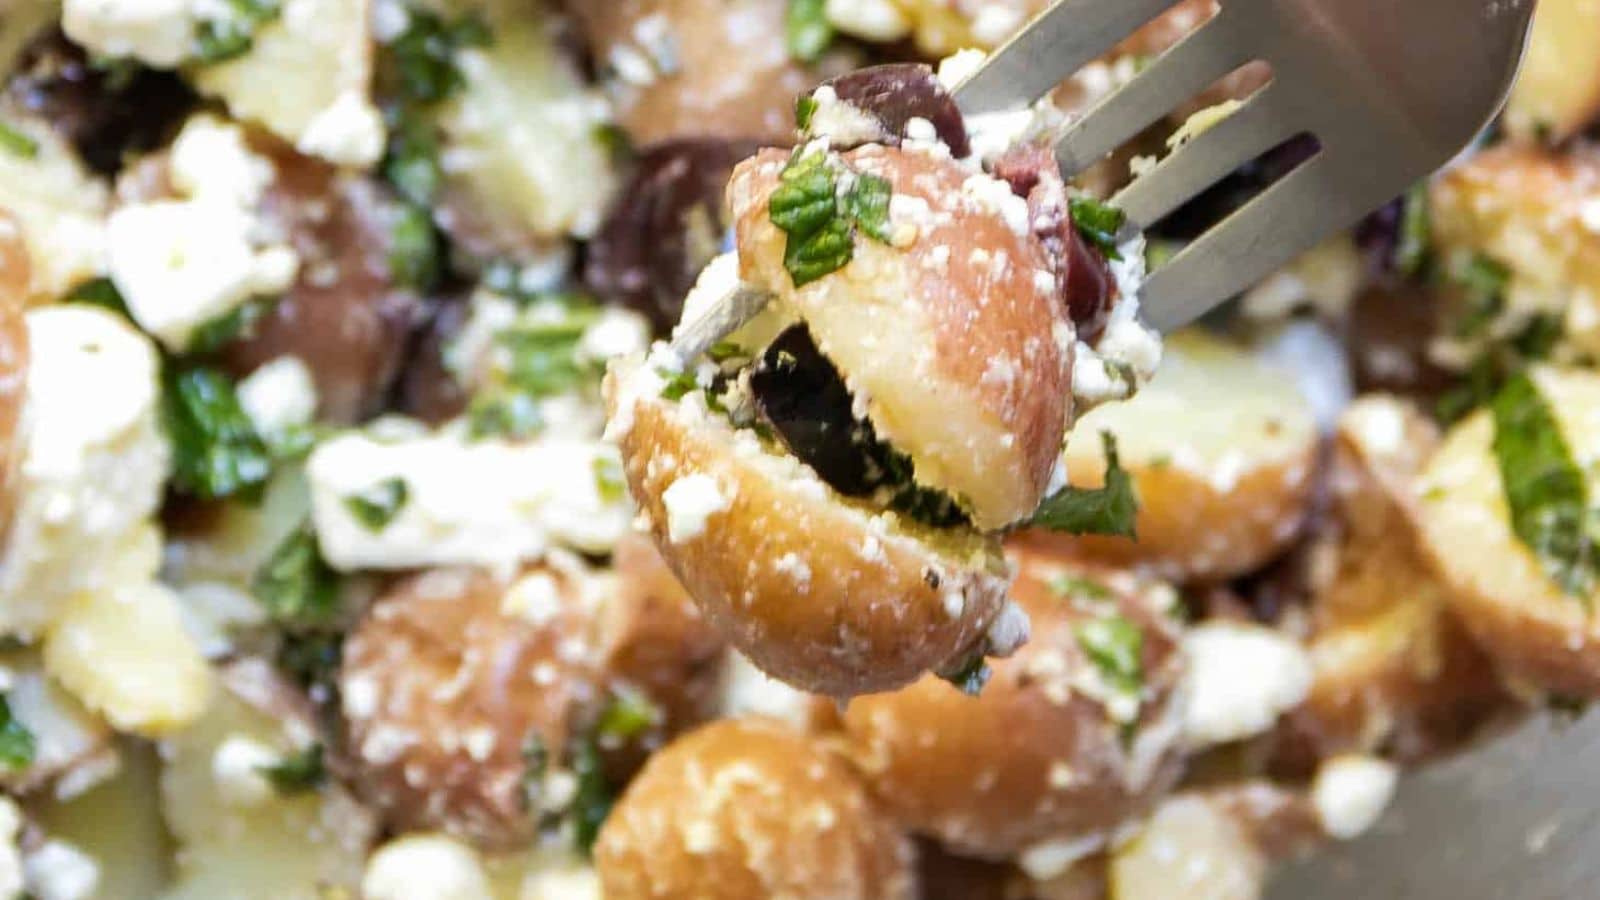 Red Potato Salad with Feta cheese by Cheerful Cook.